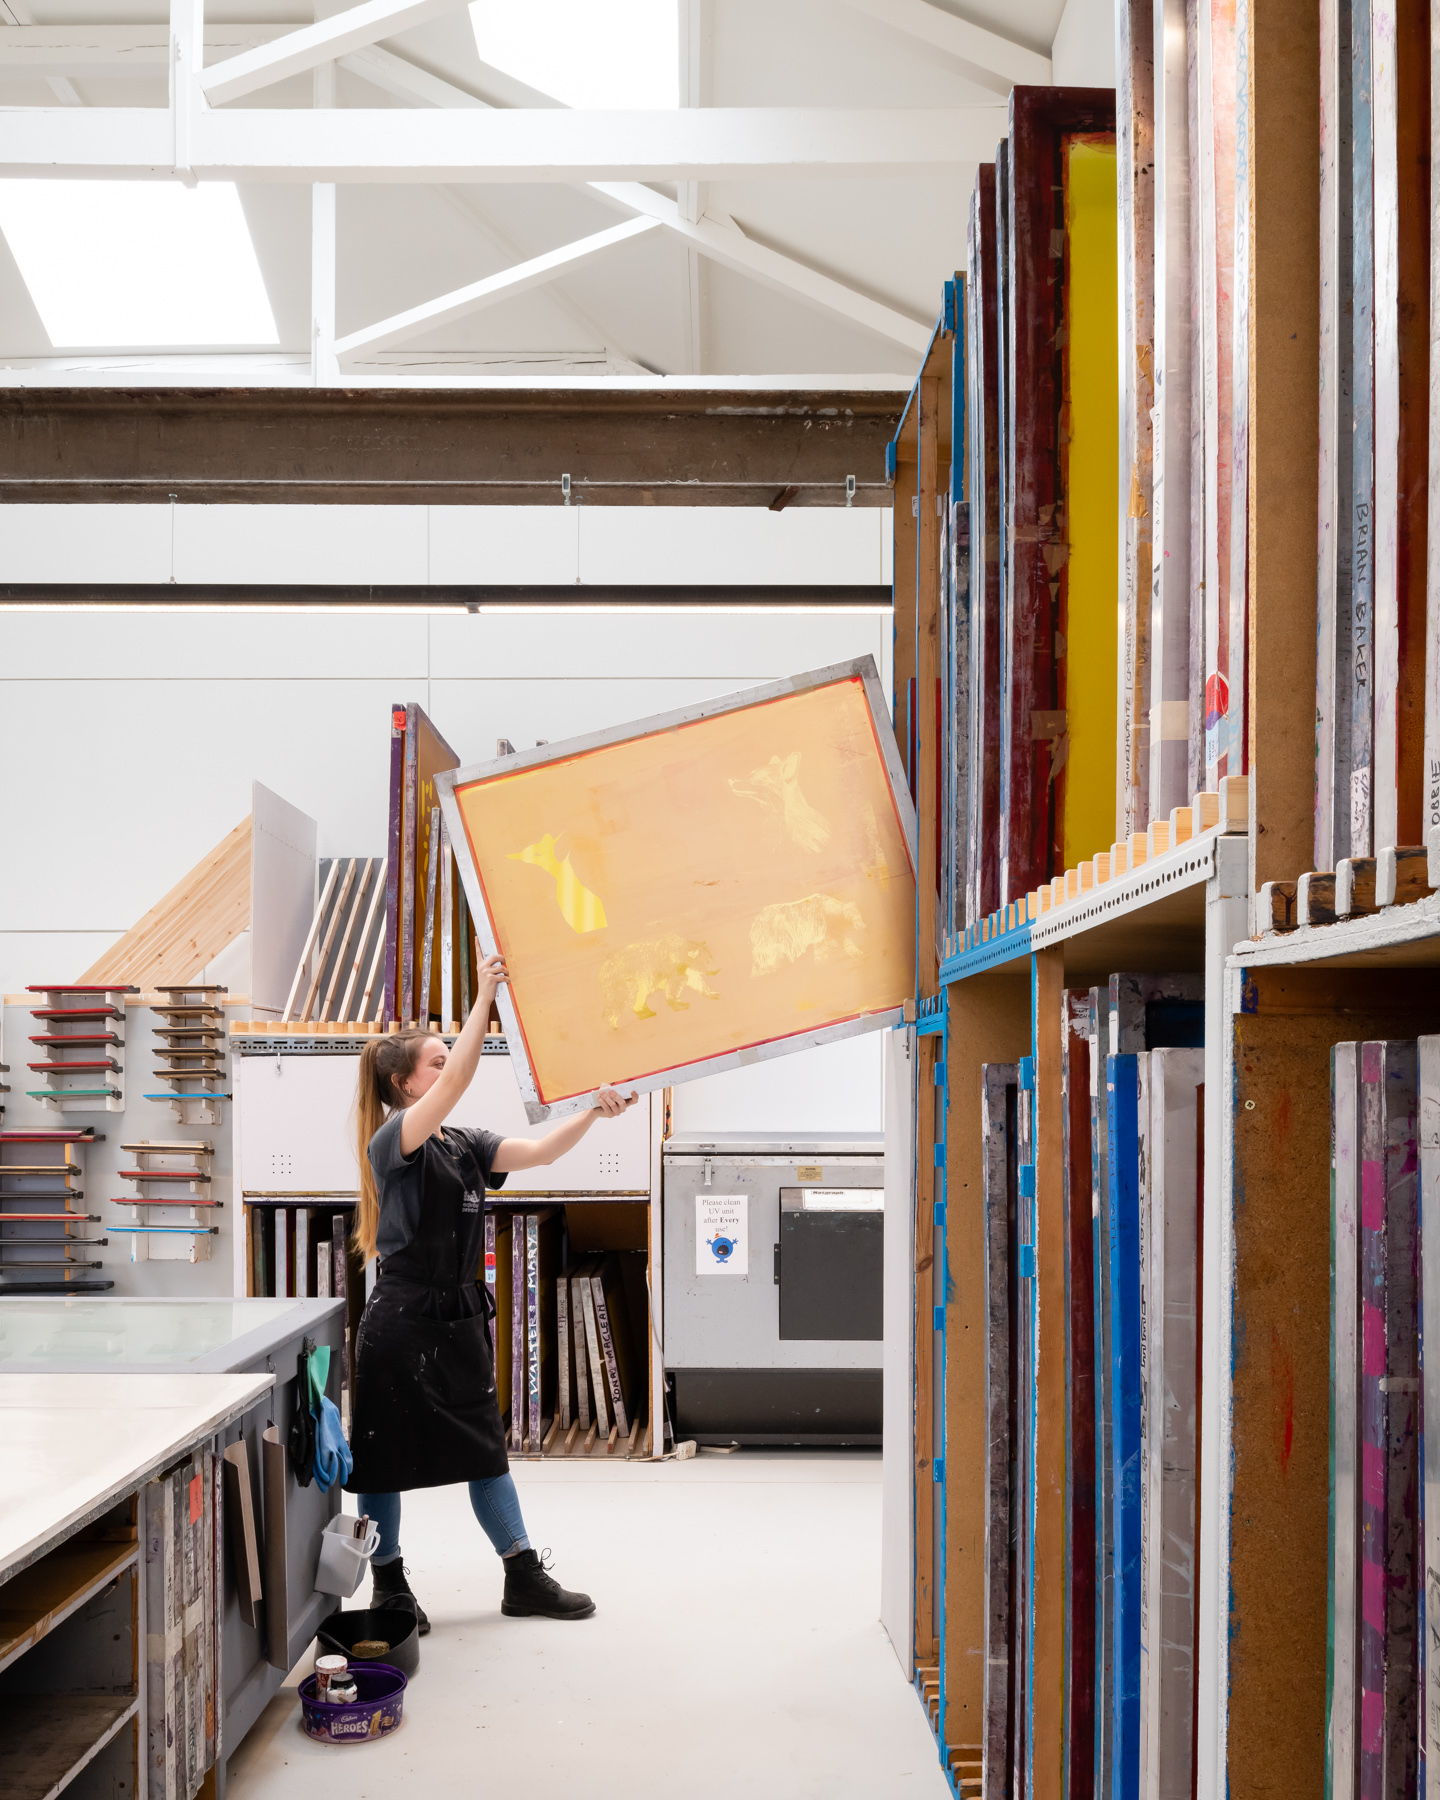 Edinburgh Printmakers secures £959,000 funding from Social Investment Scotland